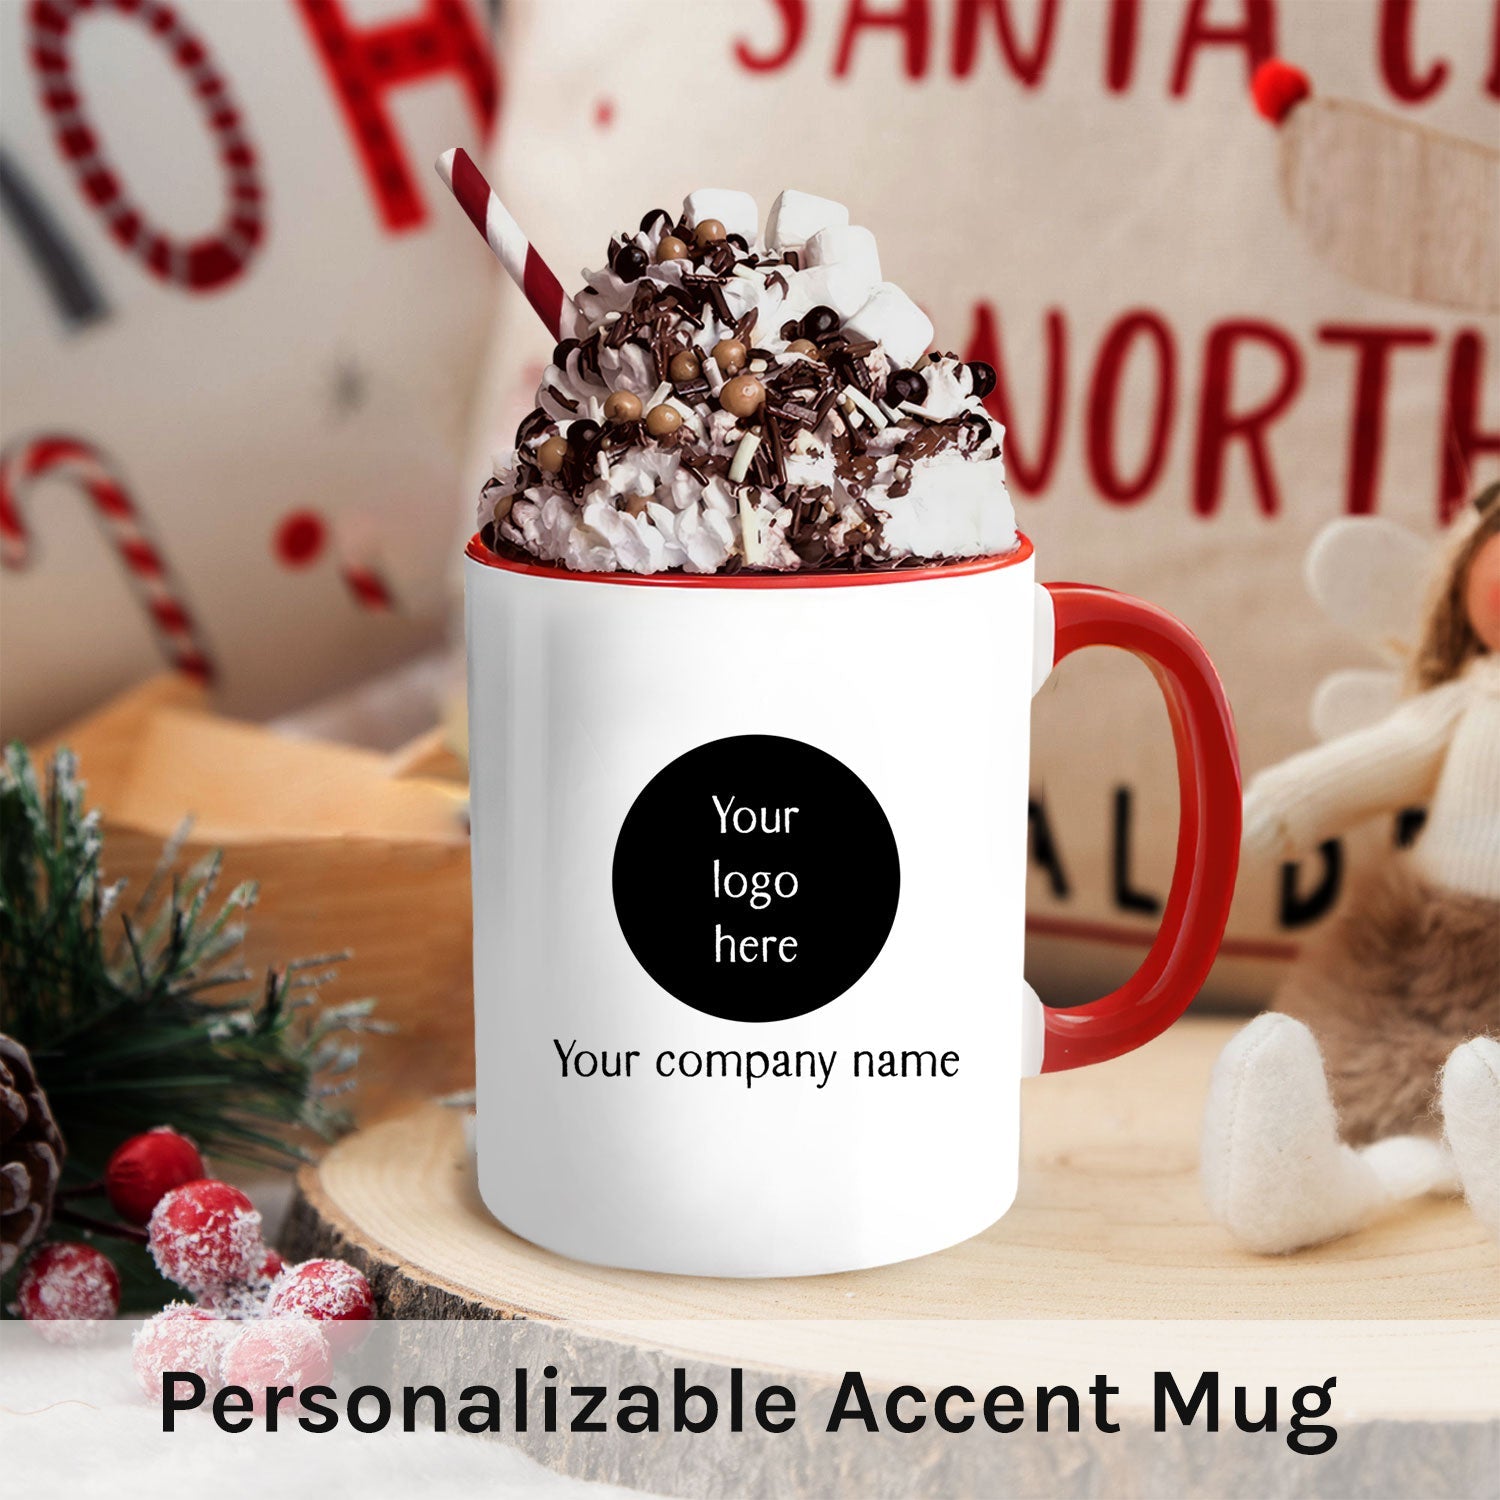 May You Be Proud Of The Difference You Make - Personalized Birthday or Christmas gift For Coworker or Employee - Custom Accent Mug - MyMindfulGifts